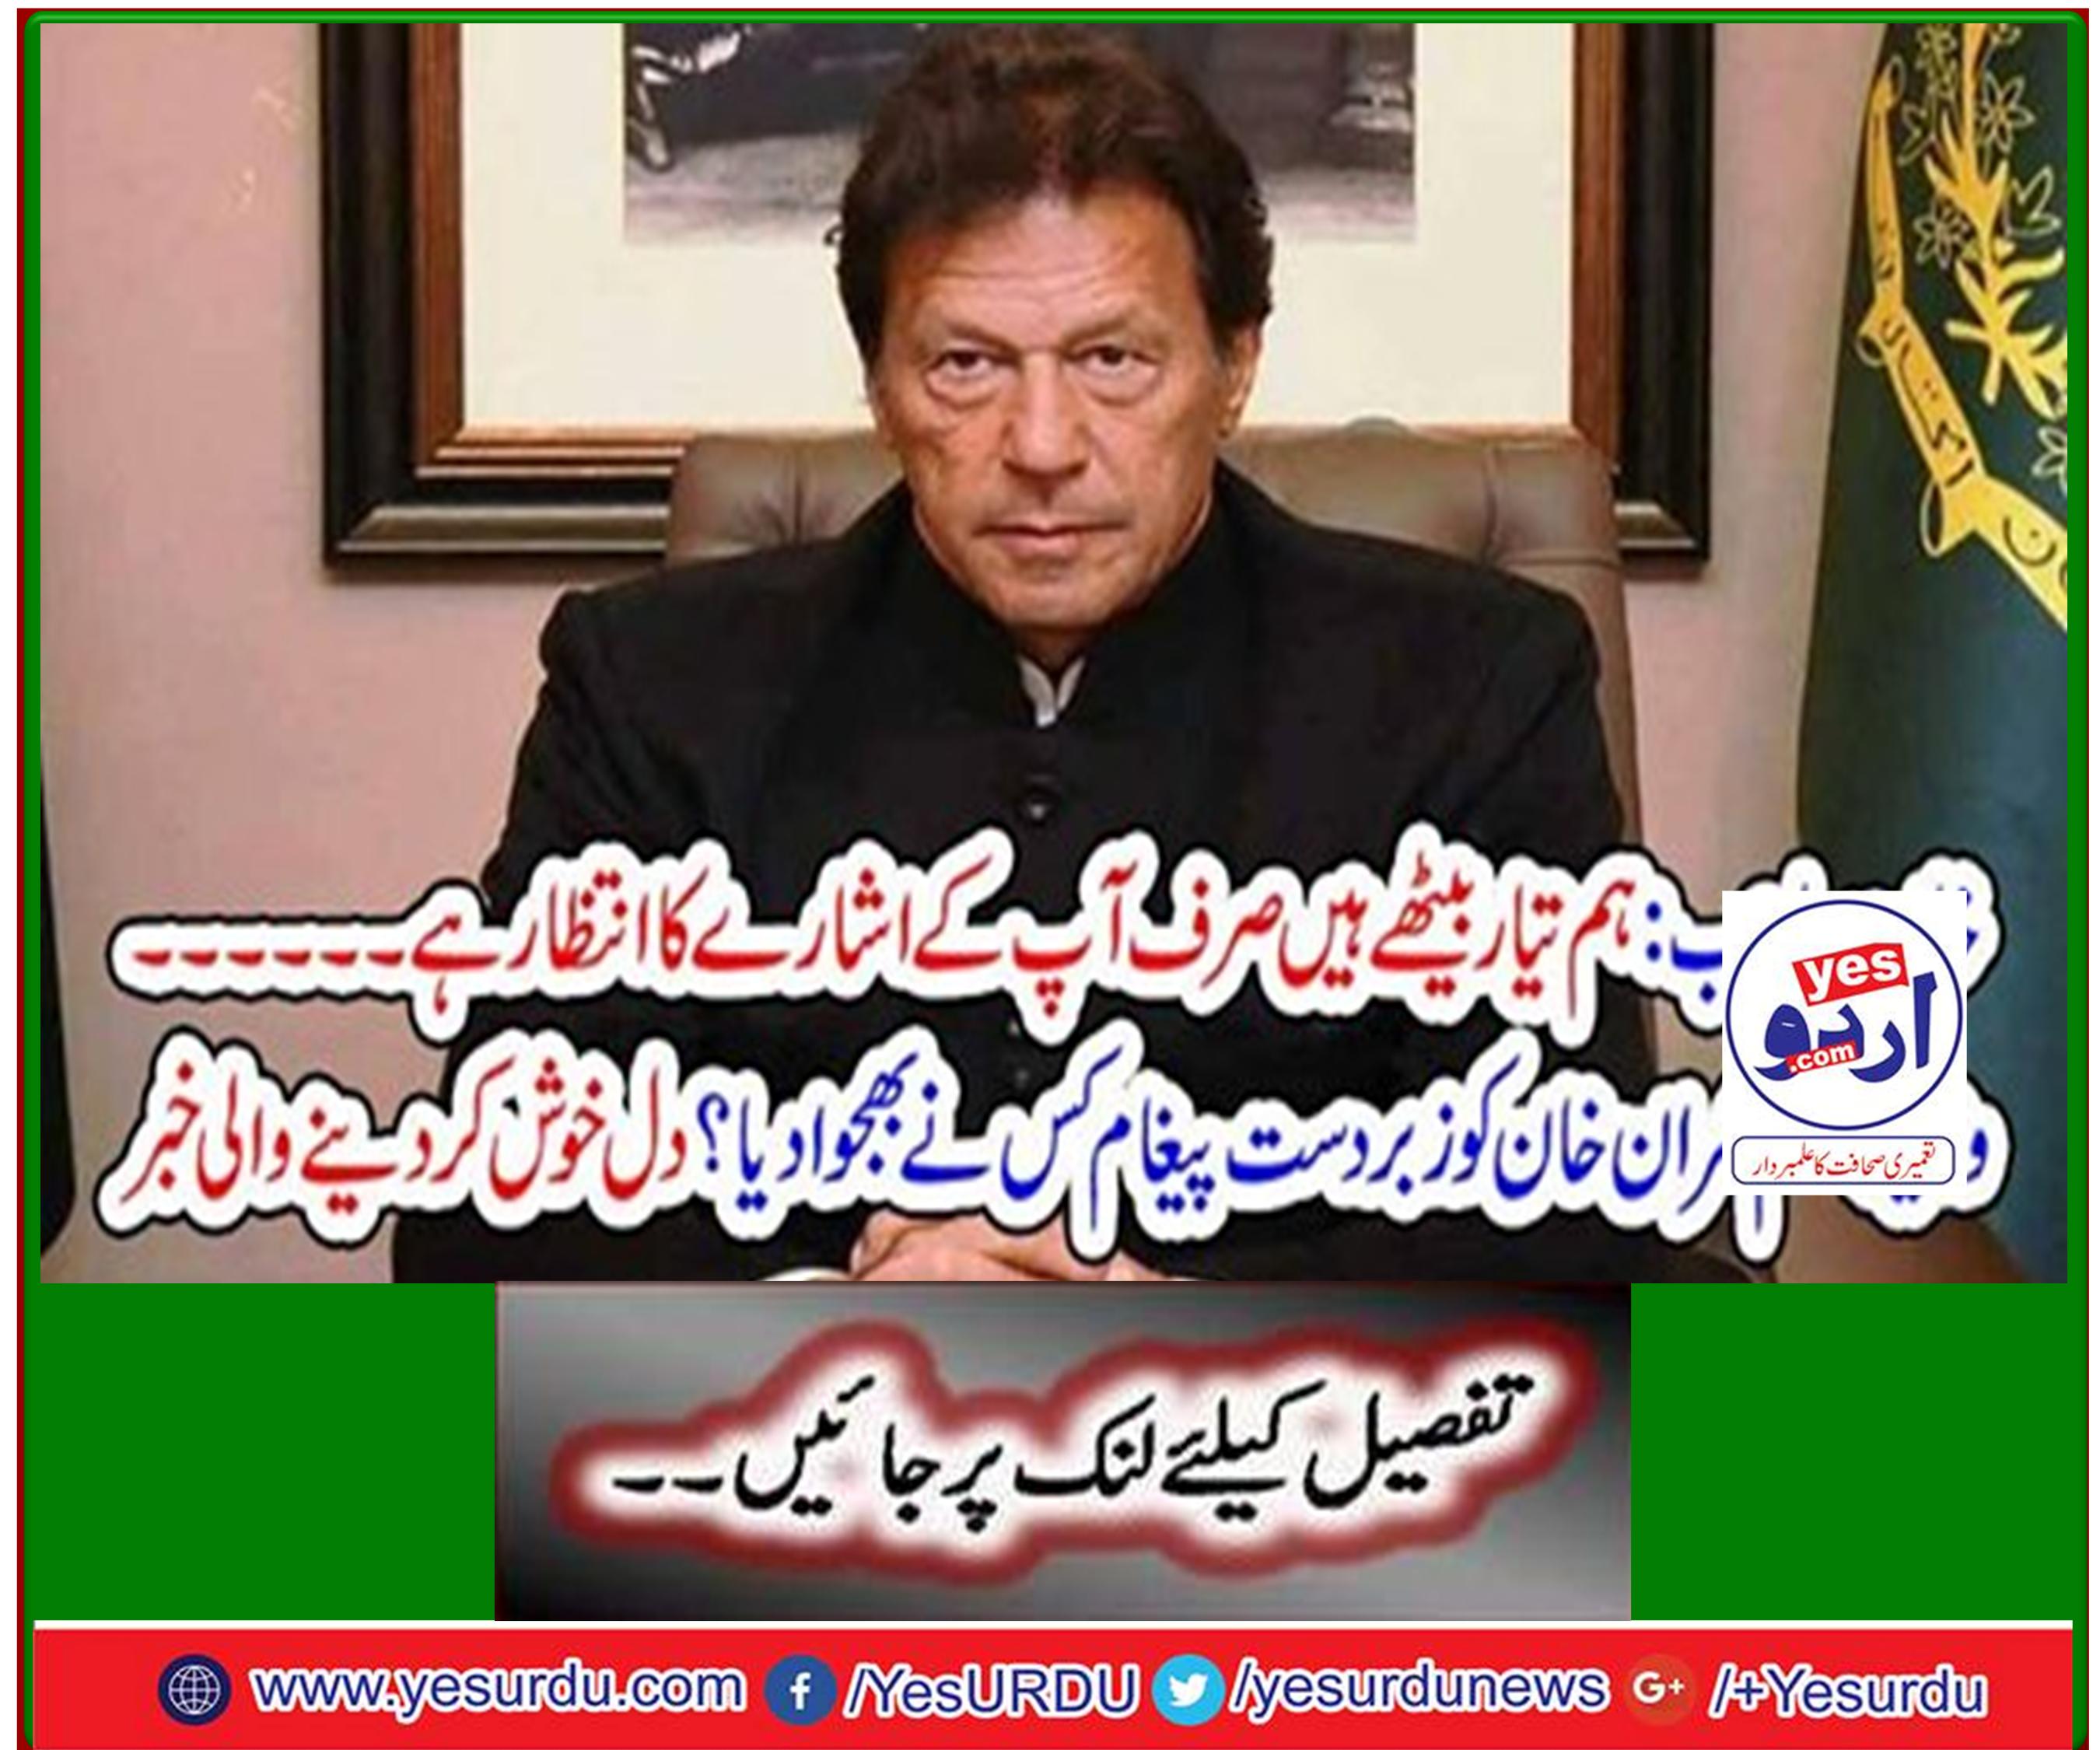 Who sent a great message to Prime Minister Imran Khan? Heartwarming news